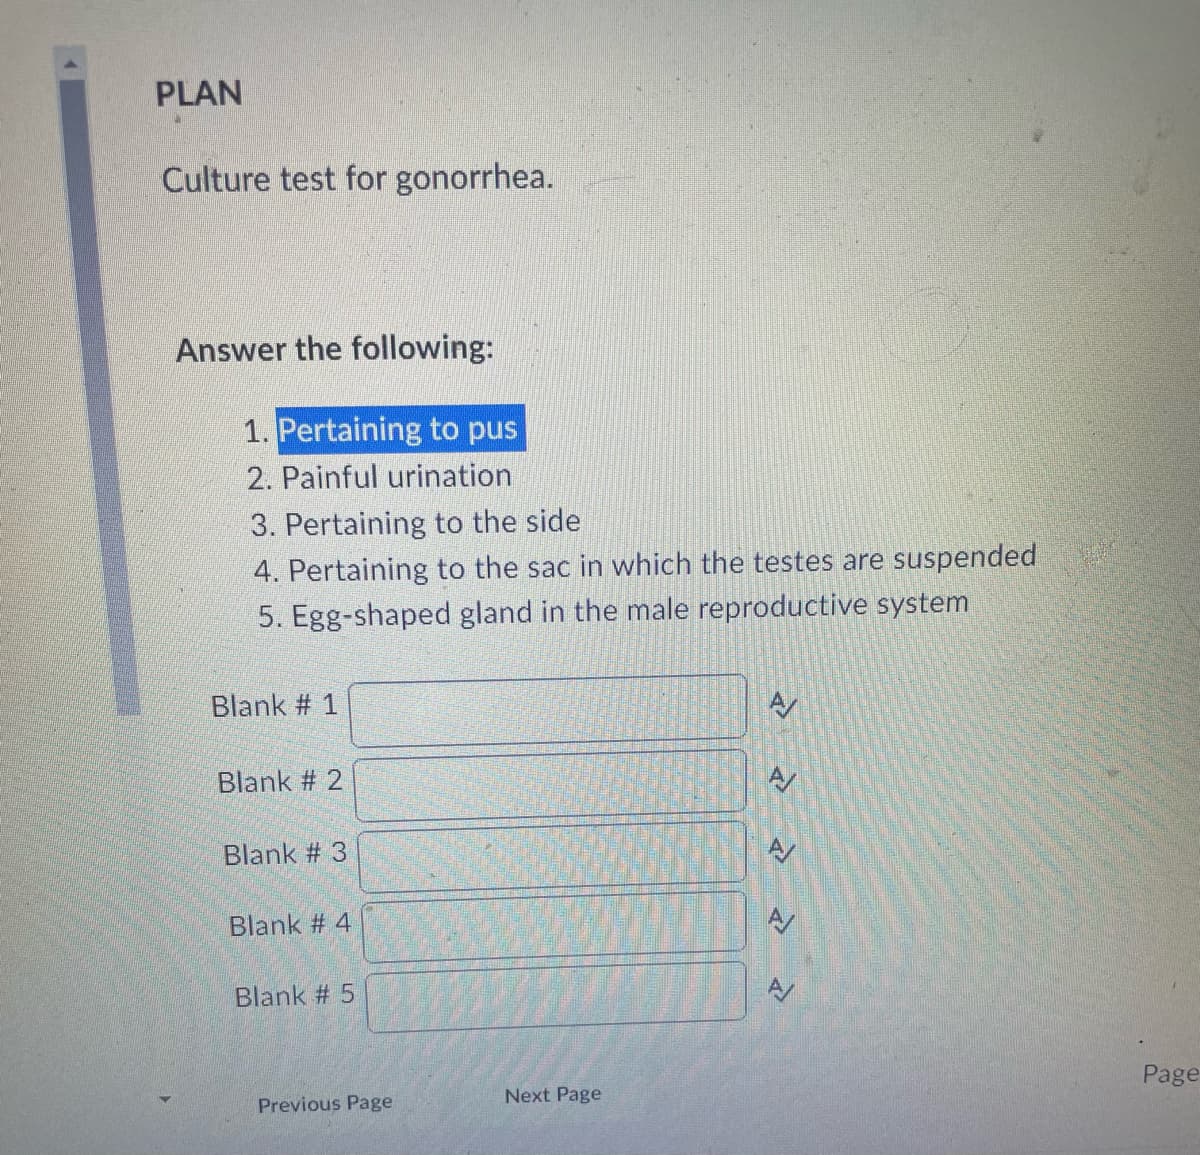 PLAN
Culture test for gonorrhea.
Answer the following:
1. Pertaining to pus
2. Painful urination
3. Pertaining to the side
4. Pertaining to the sac in which the testes are suspended
5. Egg-shaped gland in the male reproductive system
Blank # 1
Blank # 2
Blank #3
Blank # 4
Blank # 5
Previous Page
Next Page
A/
» »
A/
Page